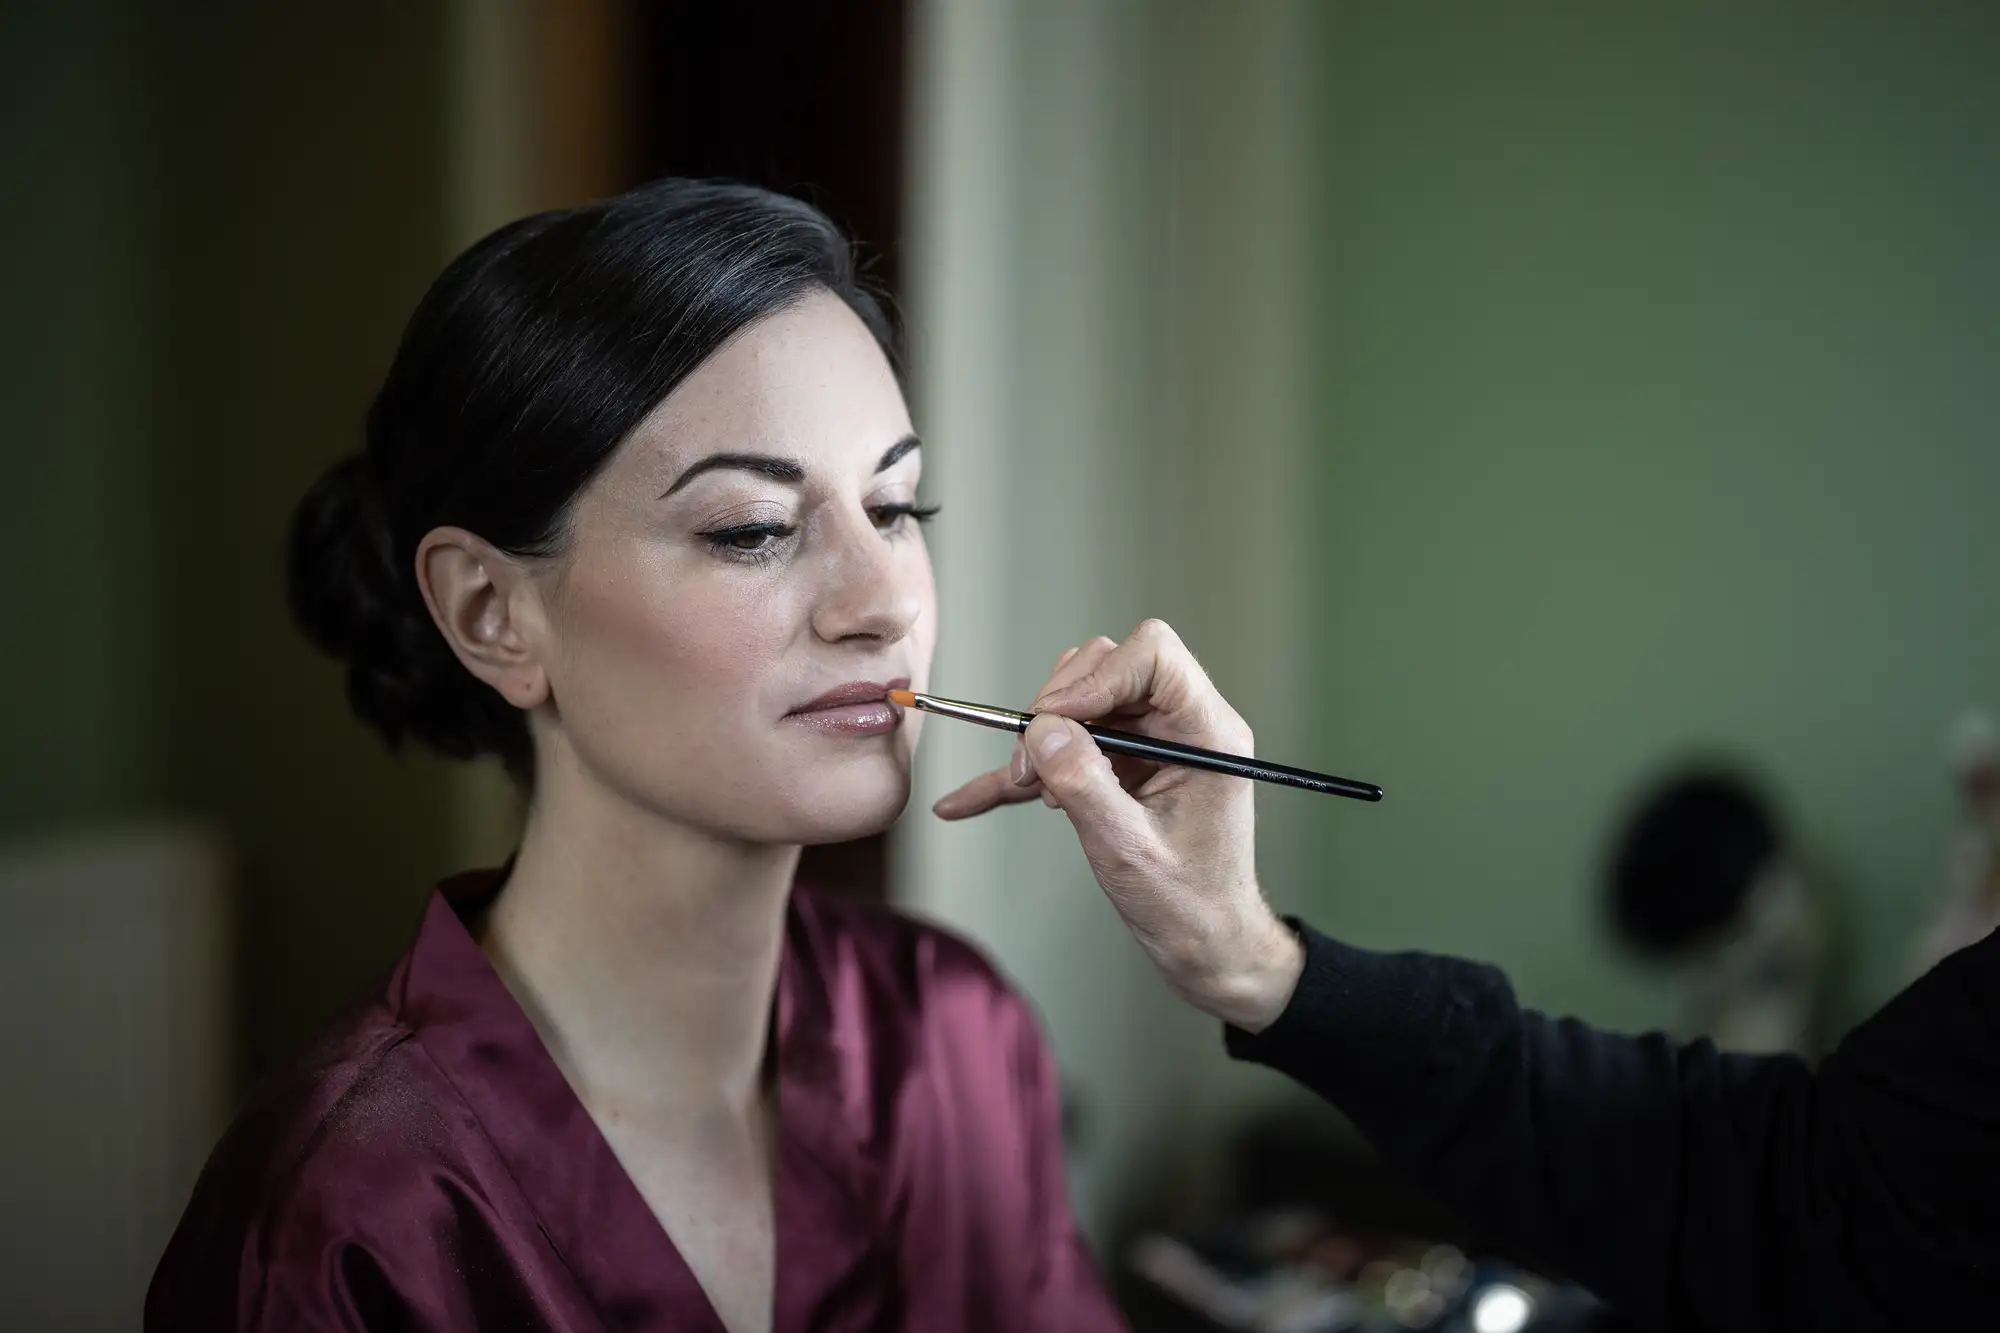 A woman in a satin robe having makeup applied by a makeup artist using a brush, in a softly lit room.